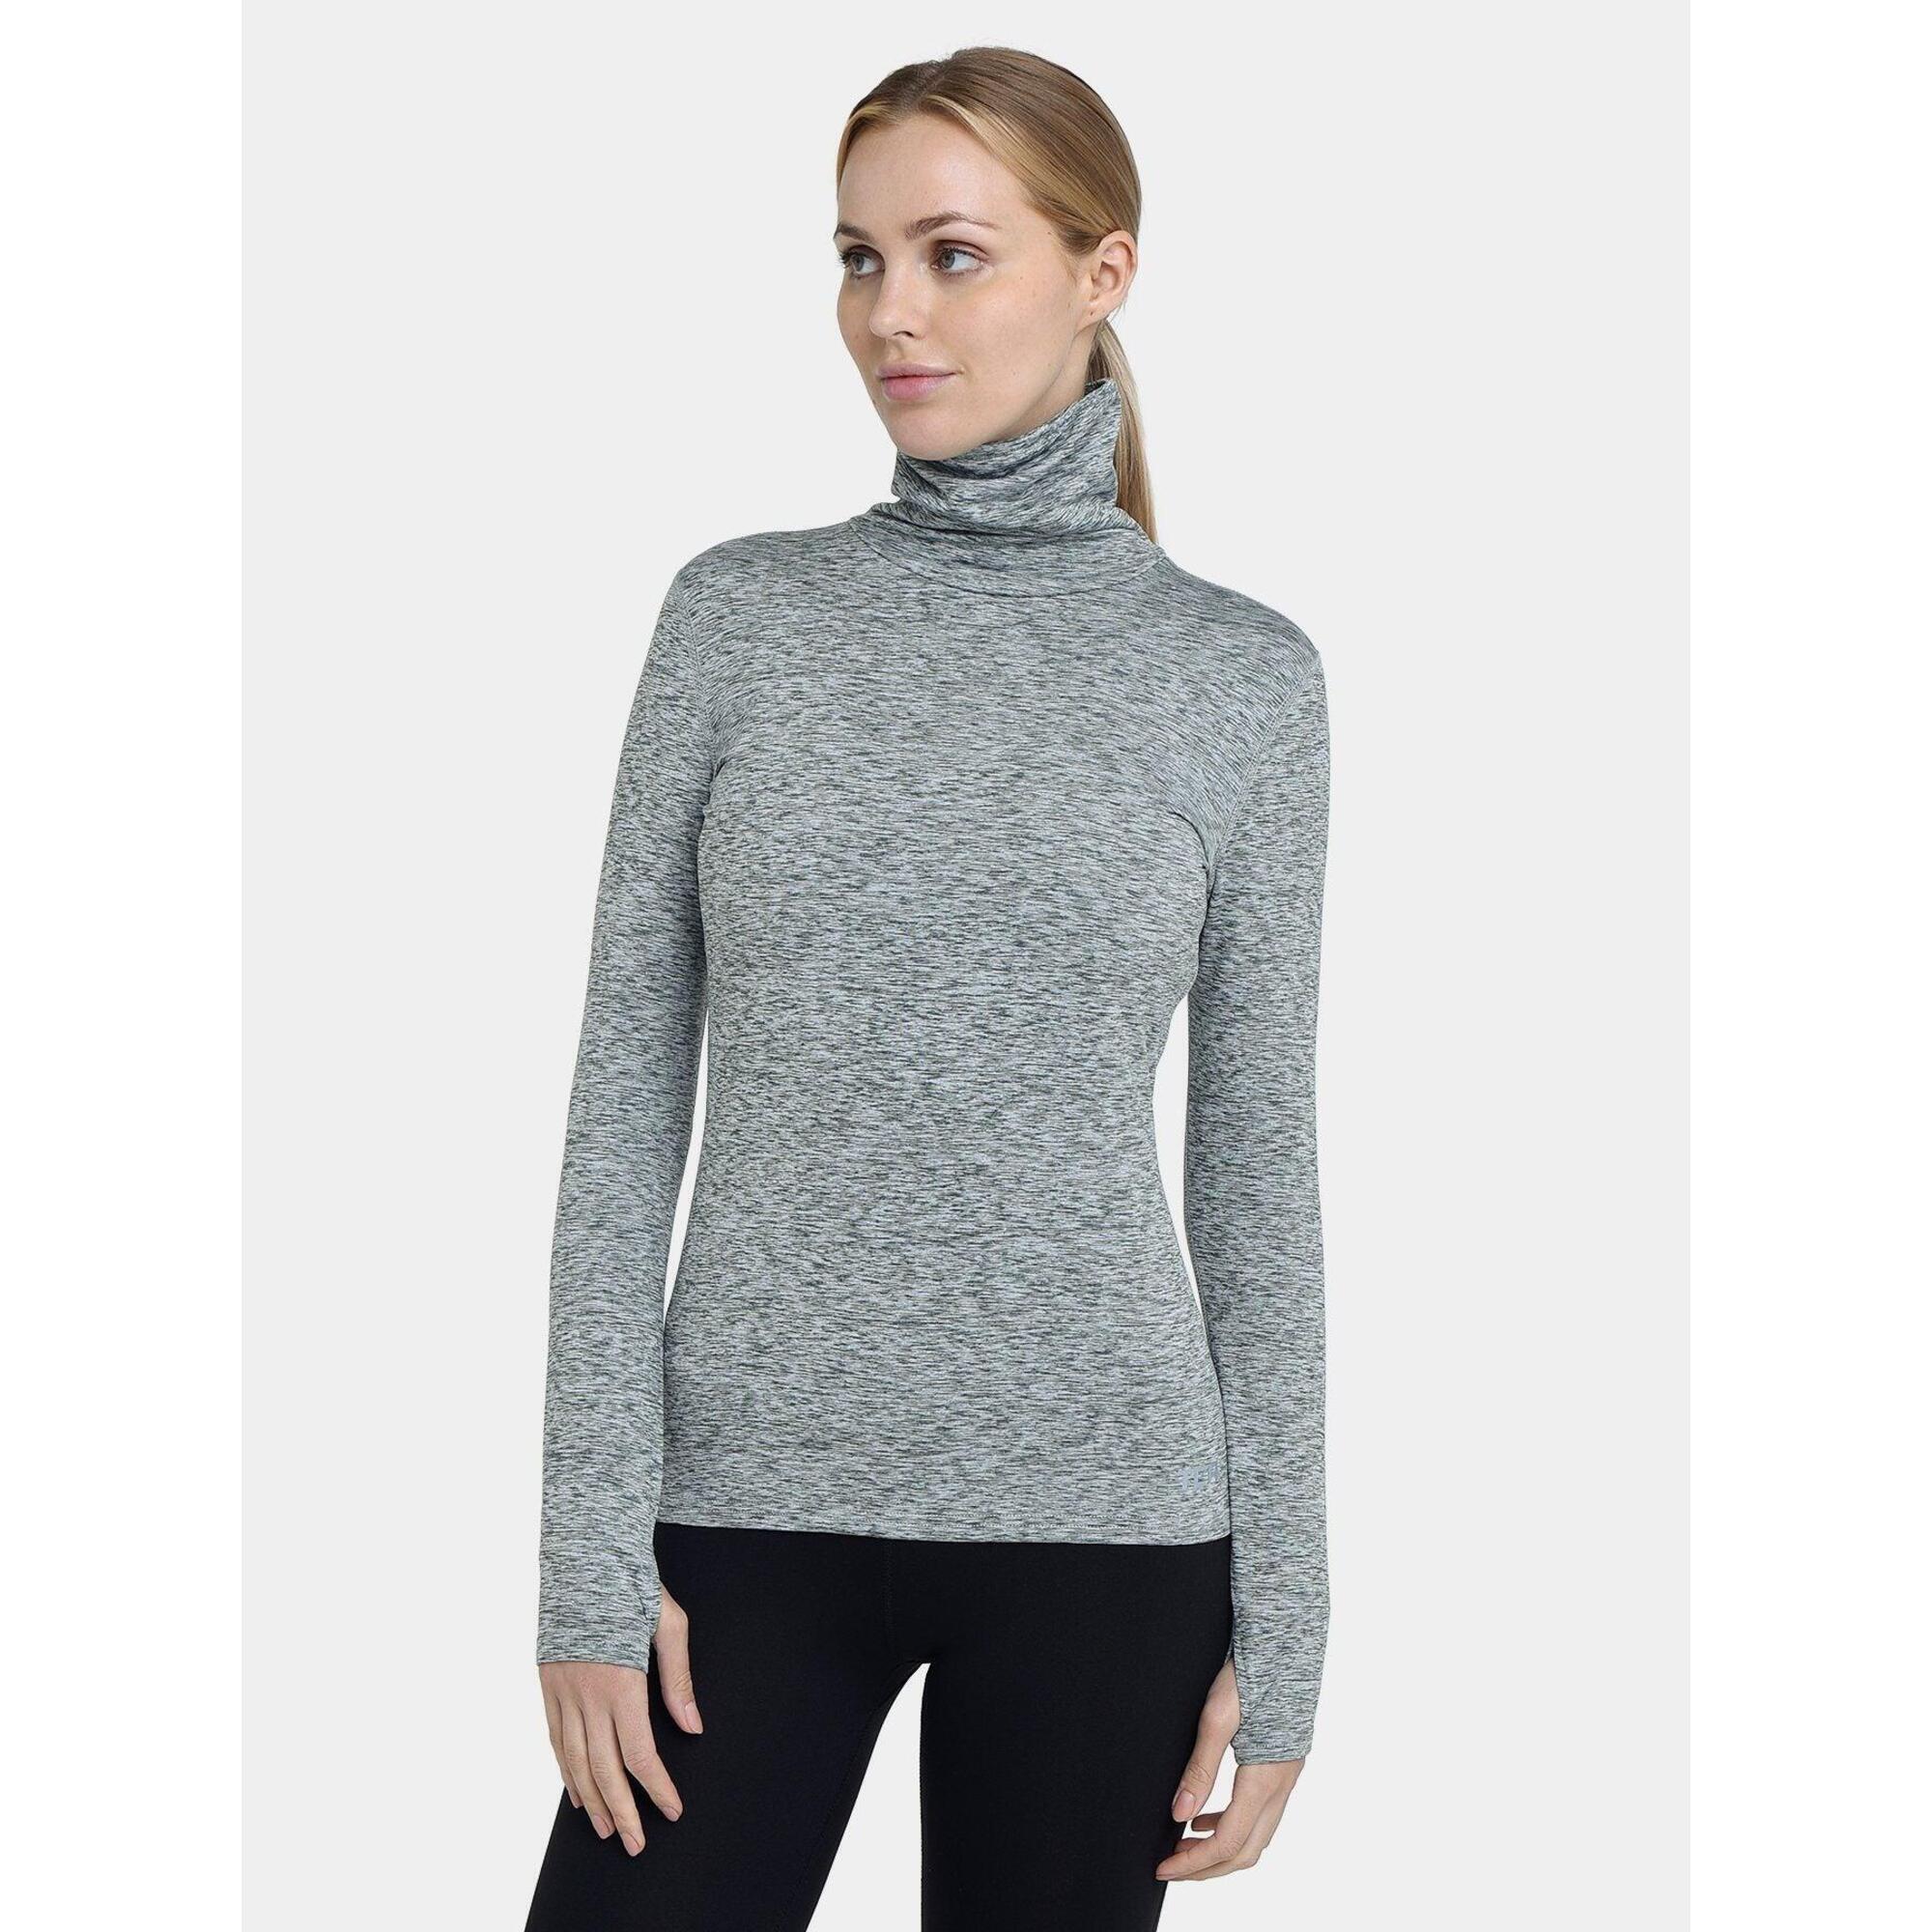 TCA Women's Thermal Funnel Neck Top - Quiet Shade Marl